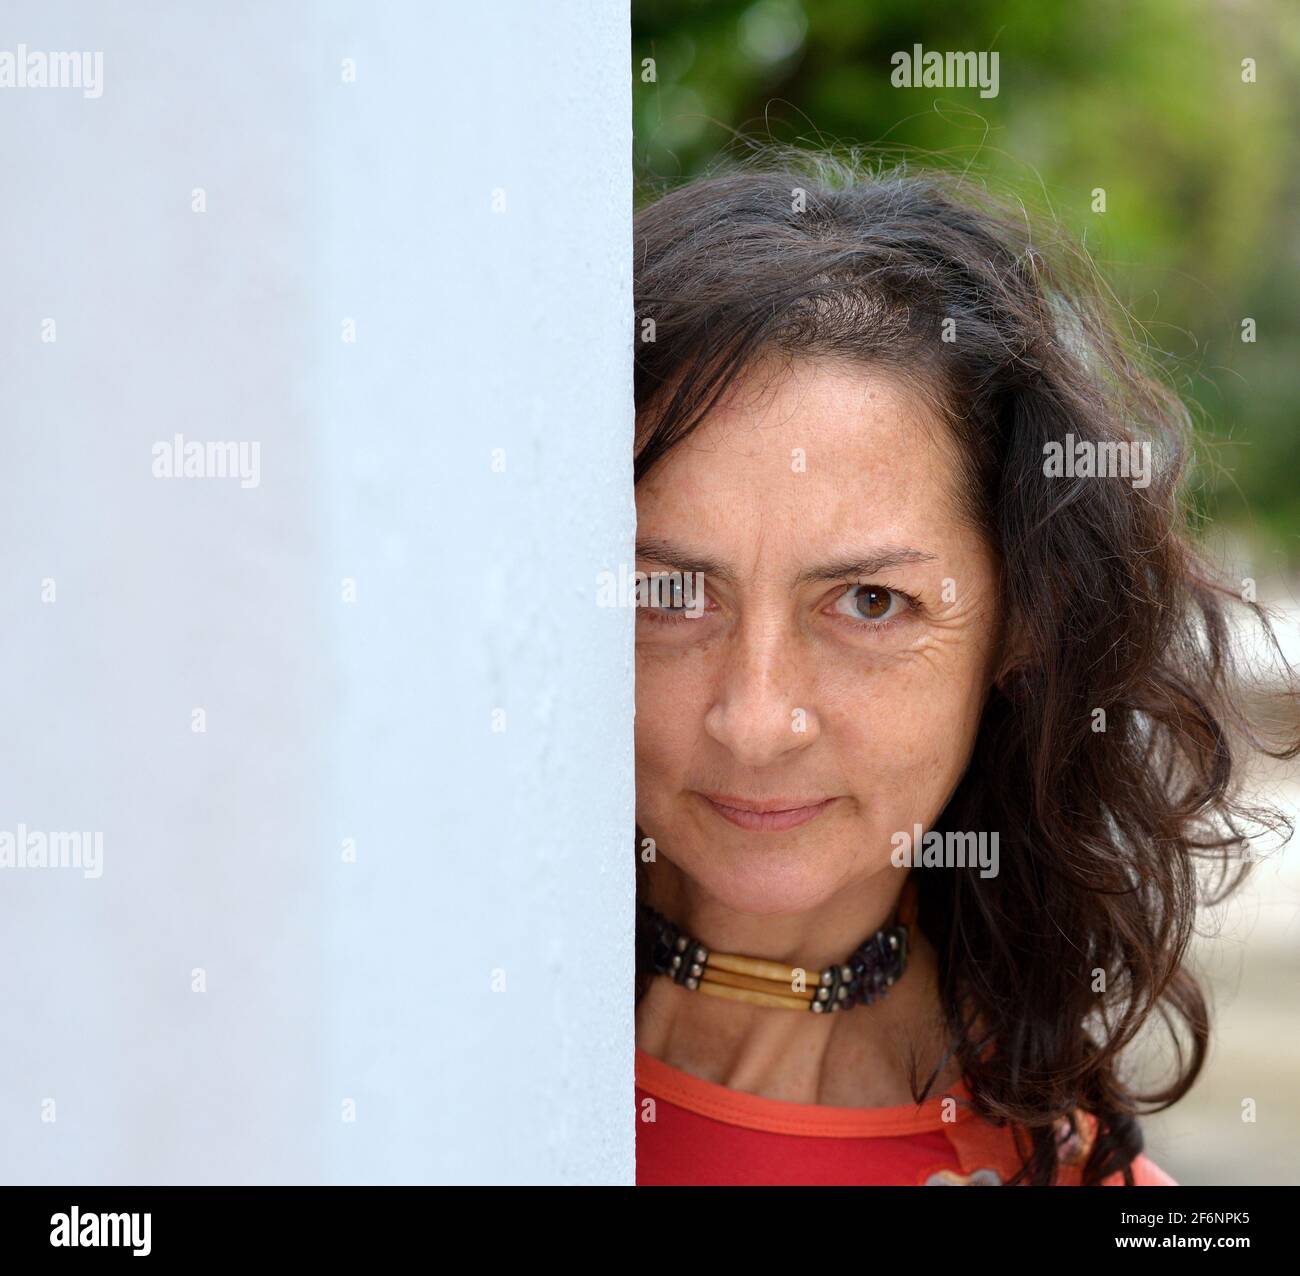 Serious mature pretty Caucasian woman with long hair peeks around a grey wall and makes a worried facial expression in front of a park background. Stock Photo